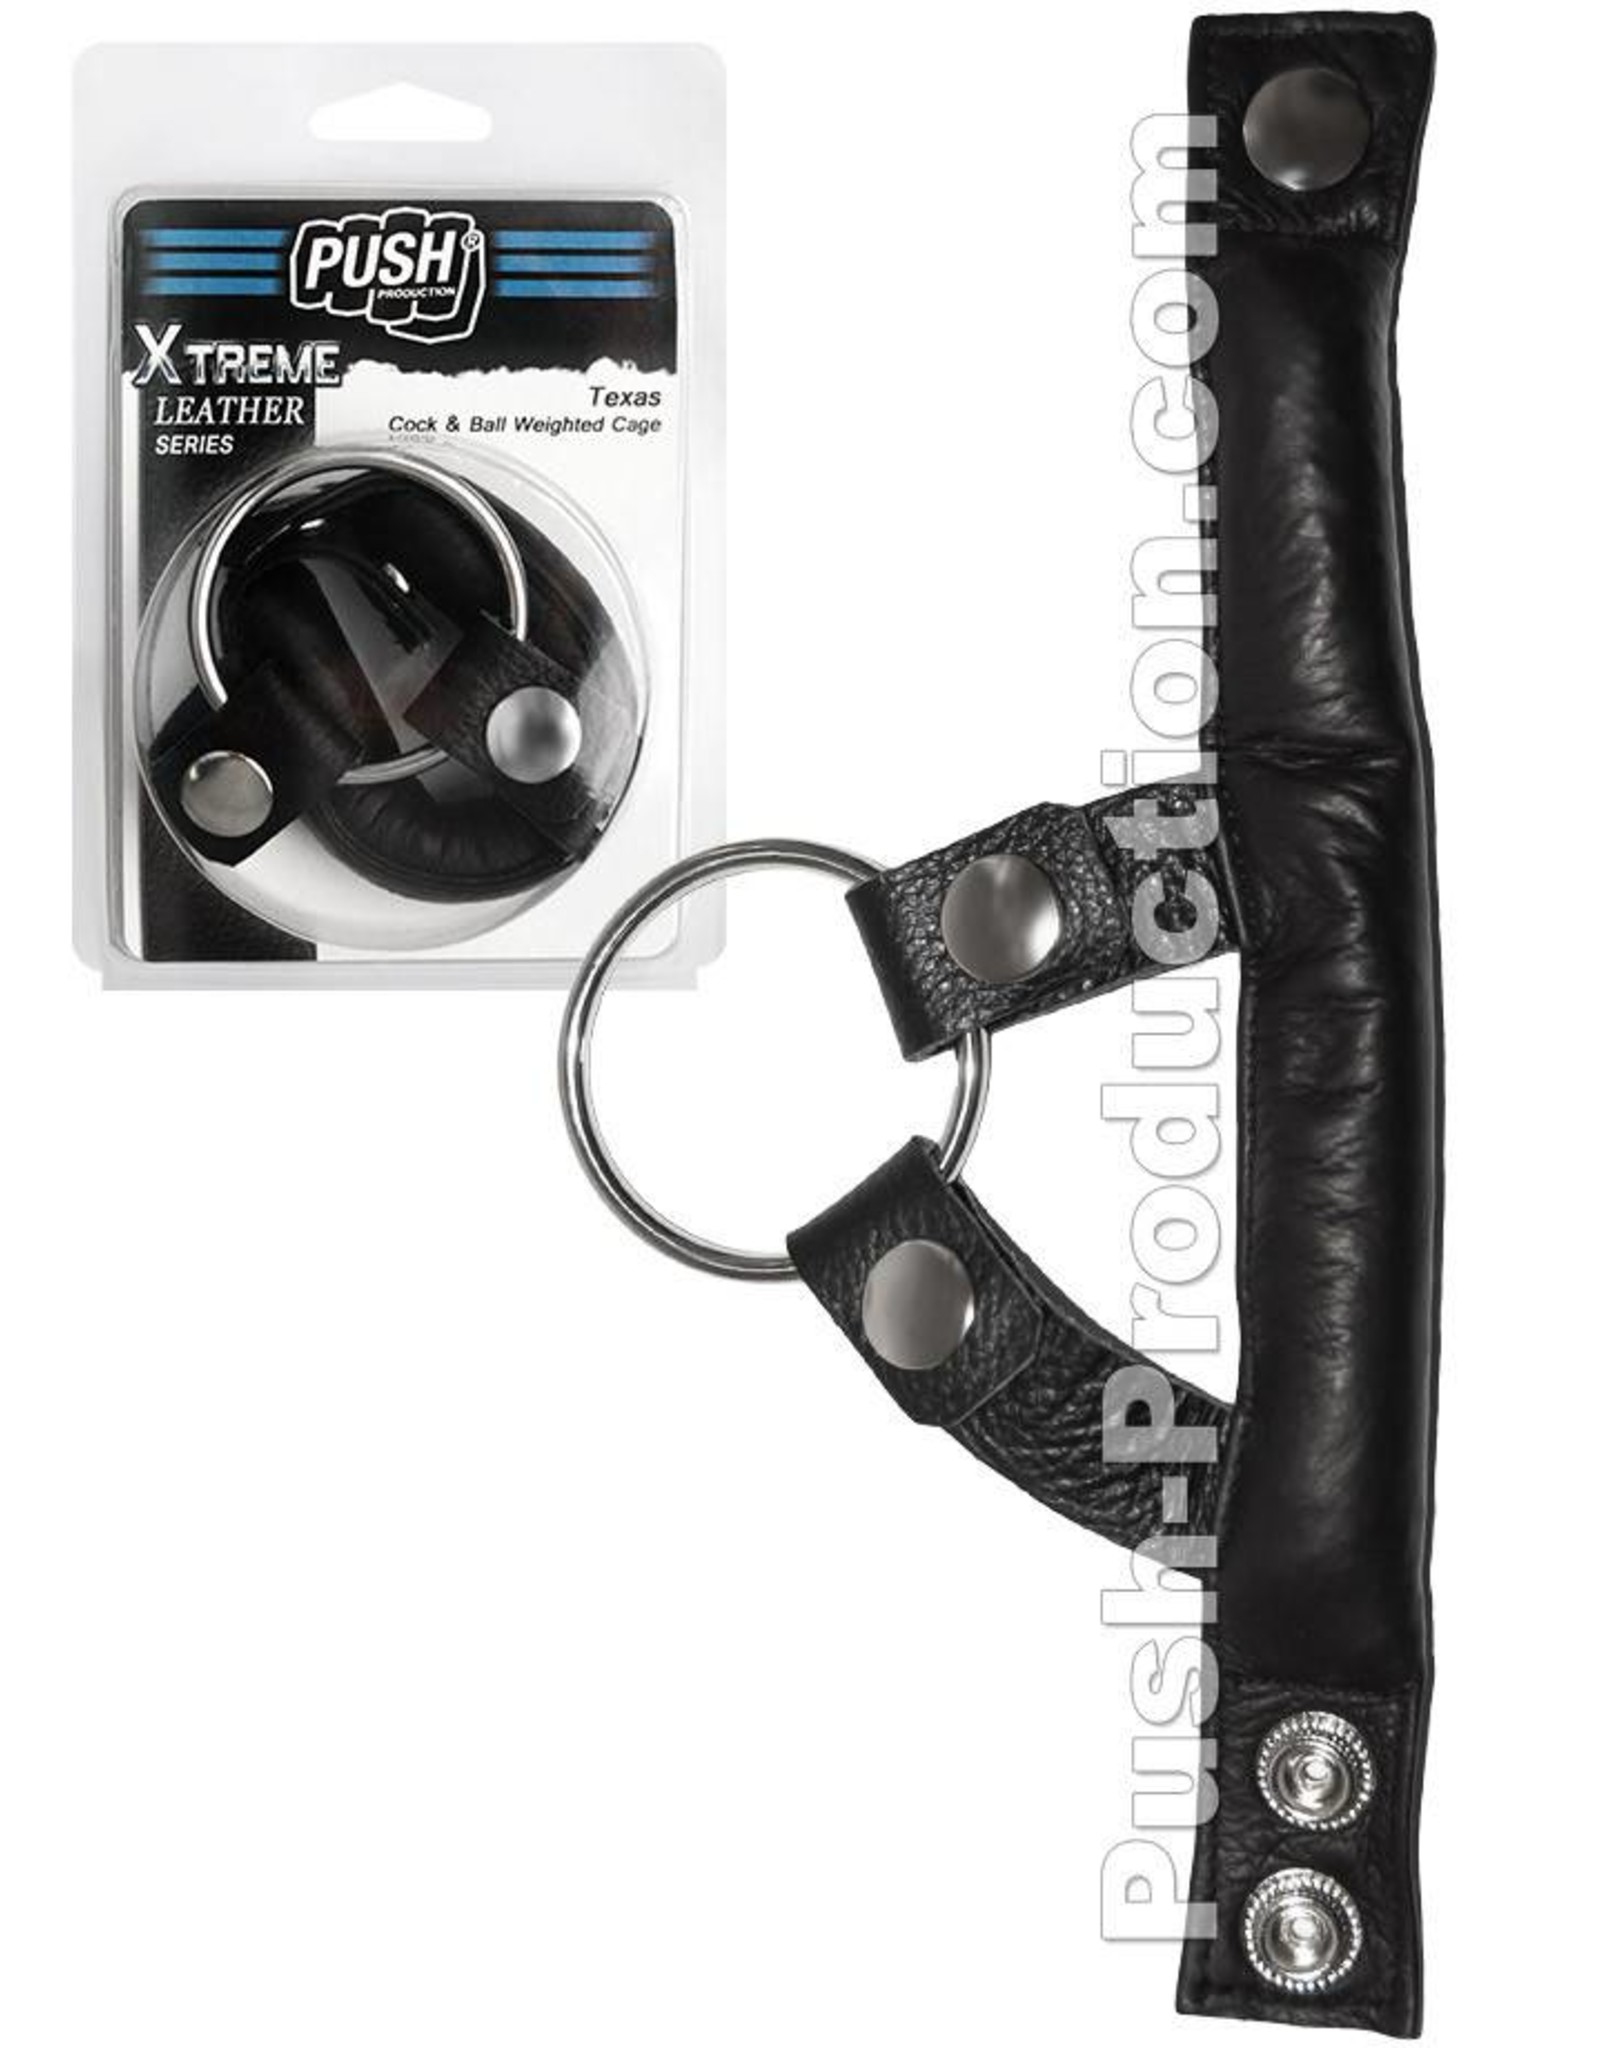 Push Xtreme Leather - Texas Cock & Ball Weighted Cage